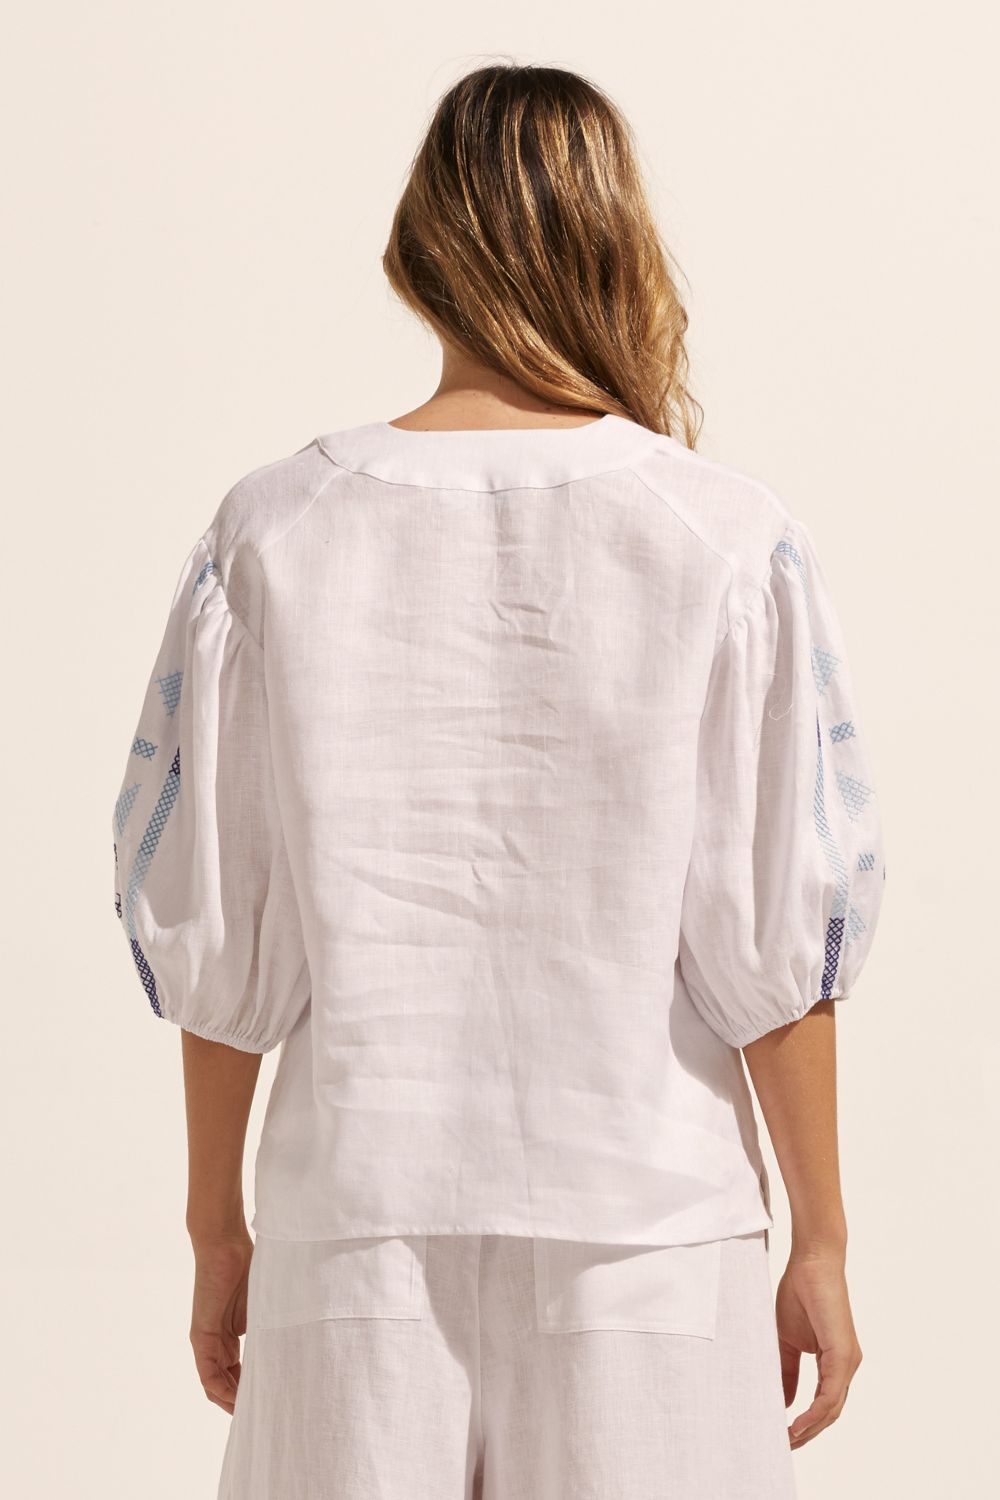 blue and white, top, mid length sleeve, button down neckline, embroidered, back image